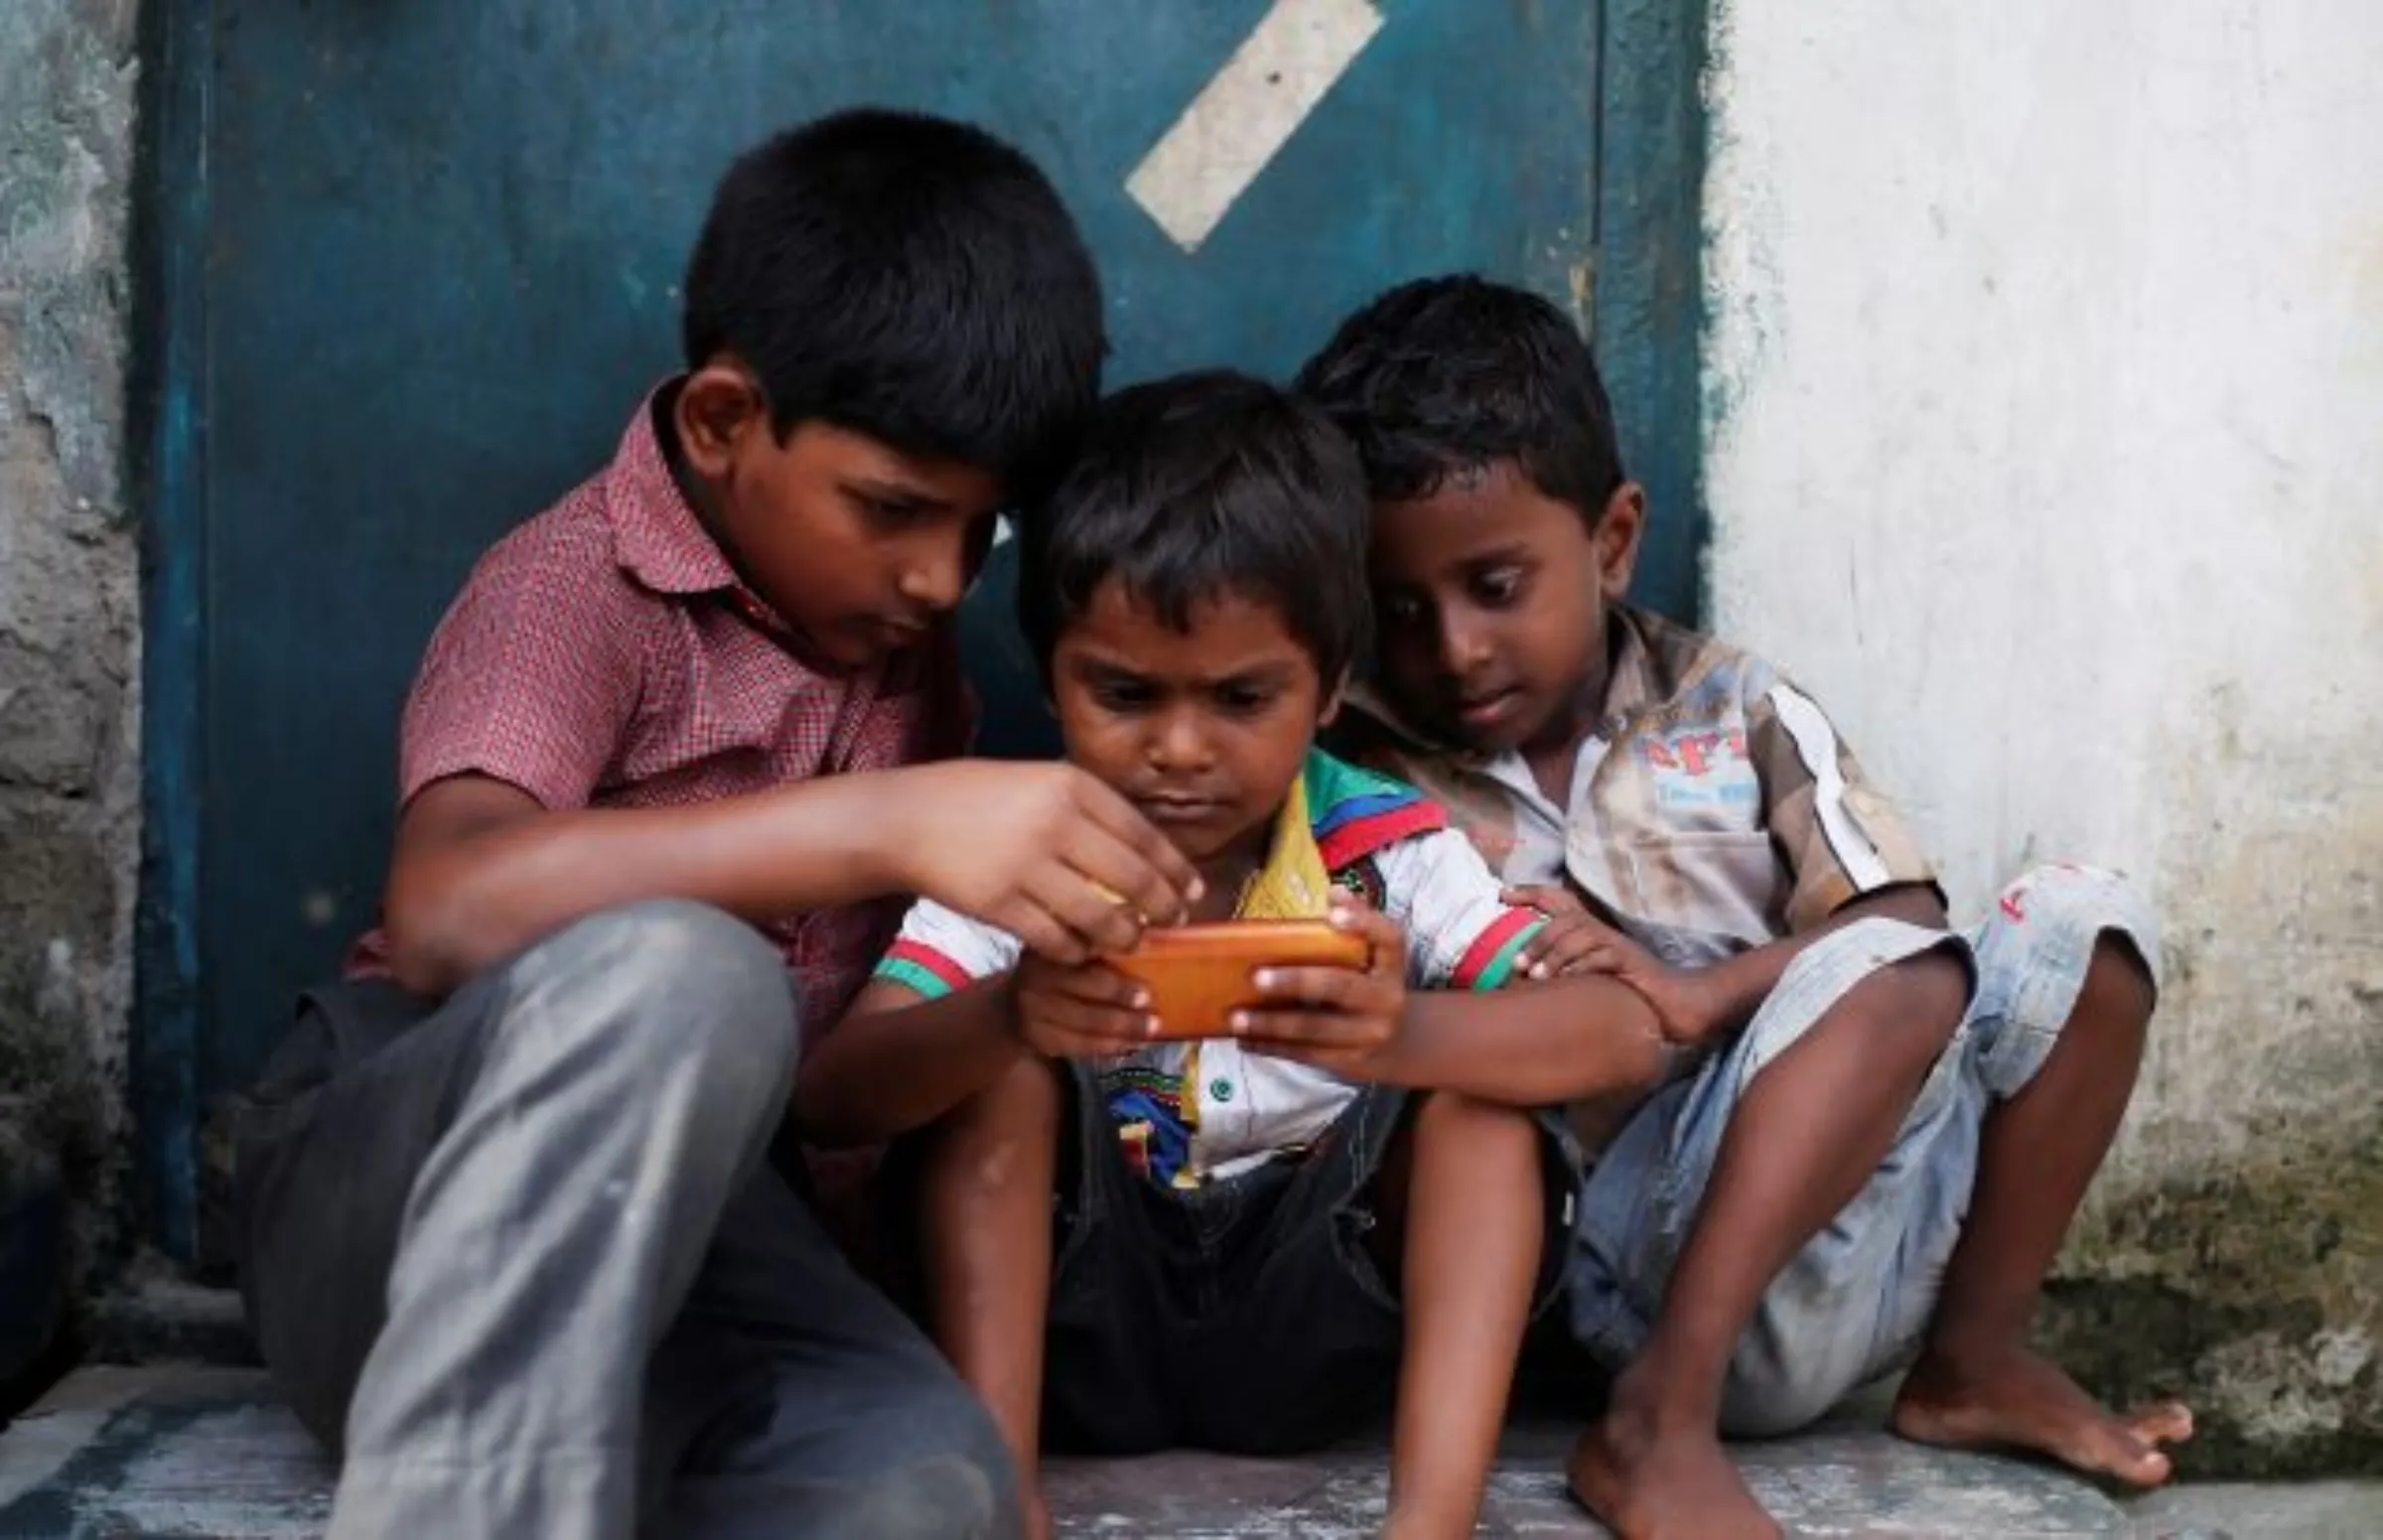 Children play a game on a mobile phone at slum area in New Delhi, India July 4, 2017. REUTERS/Adnan Abidi